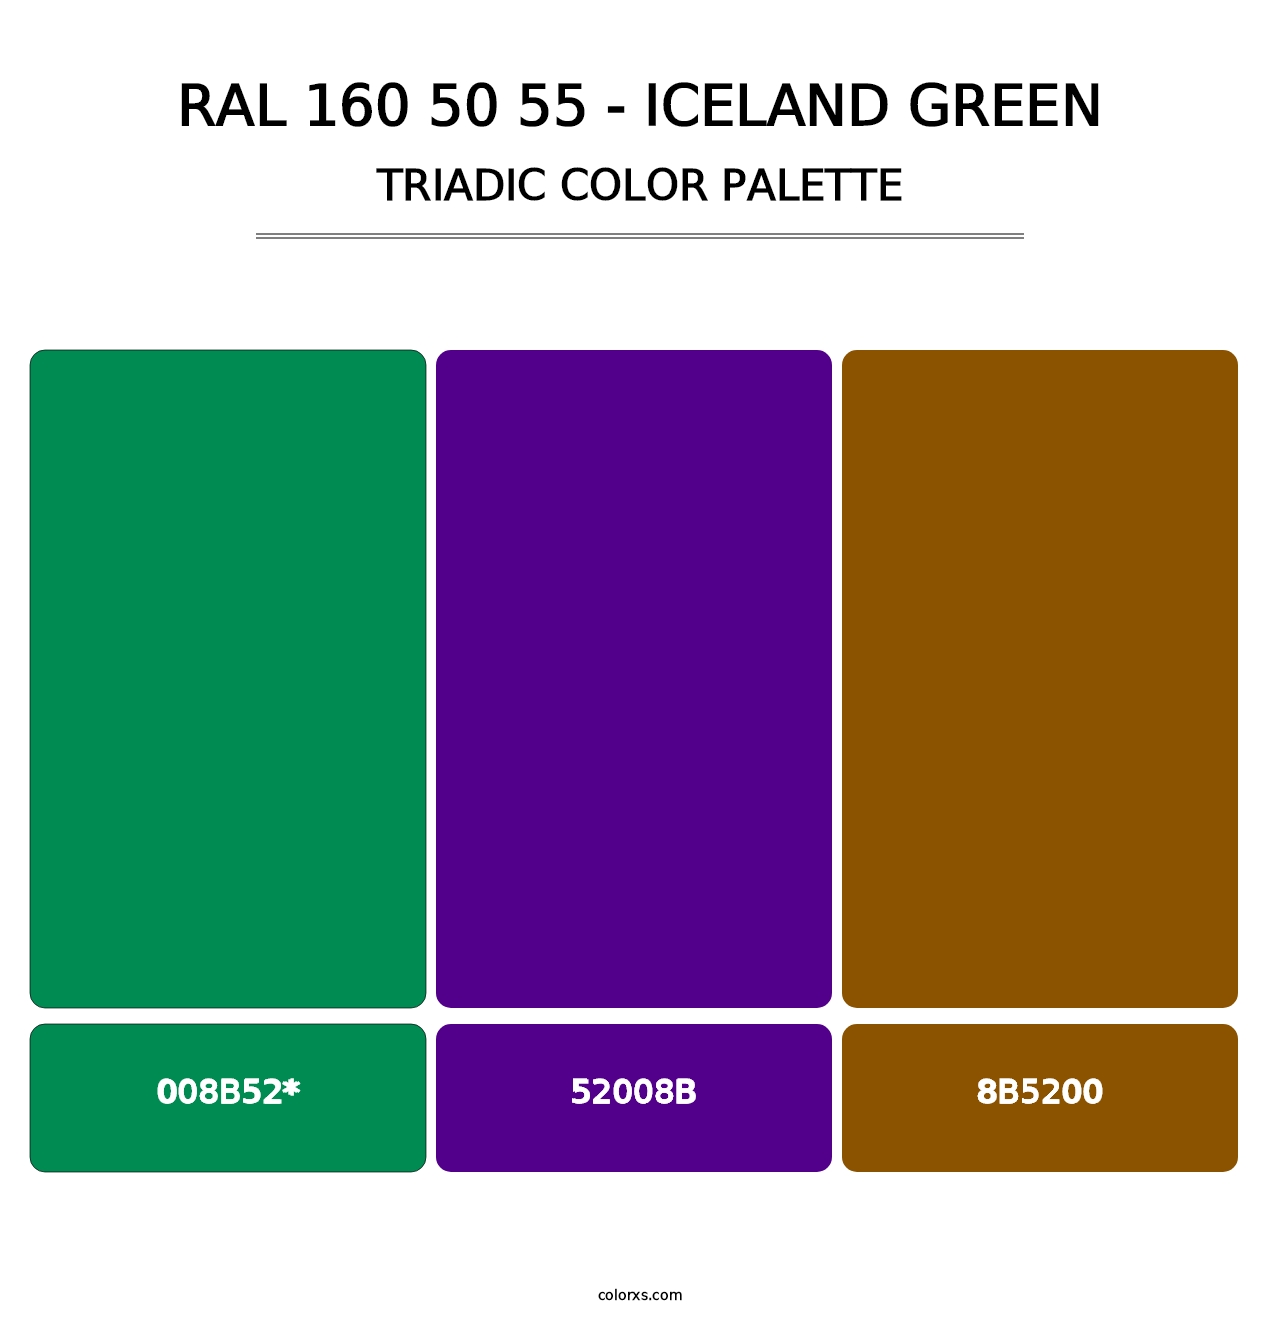 RAL 160 50 55 - Iceland Green - Triadic Color Palette